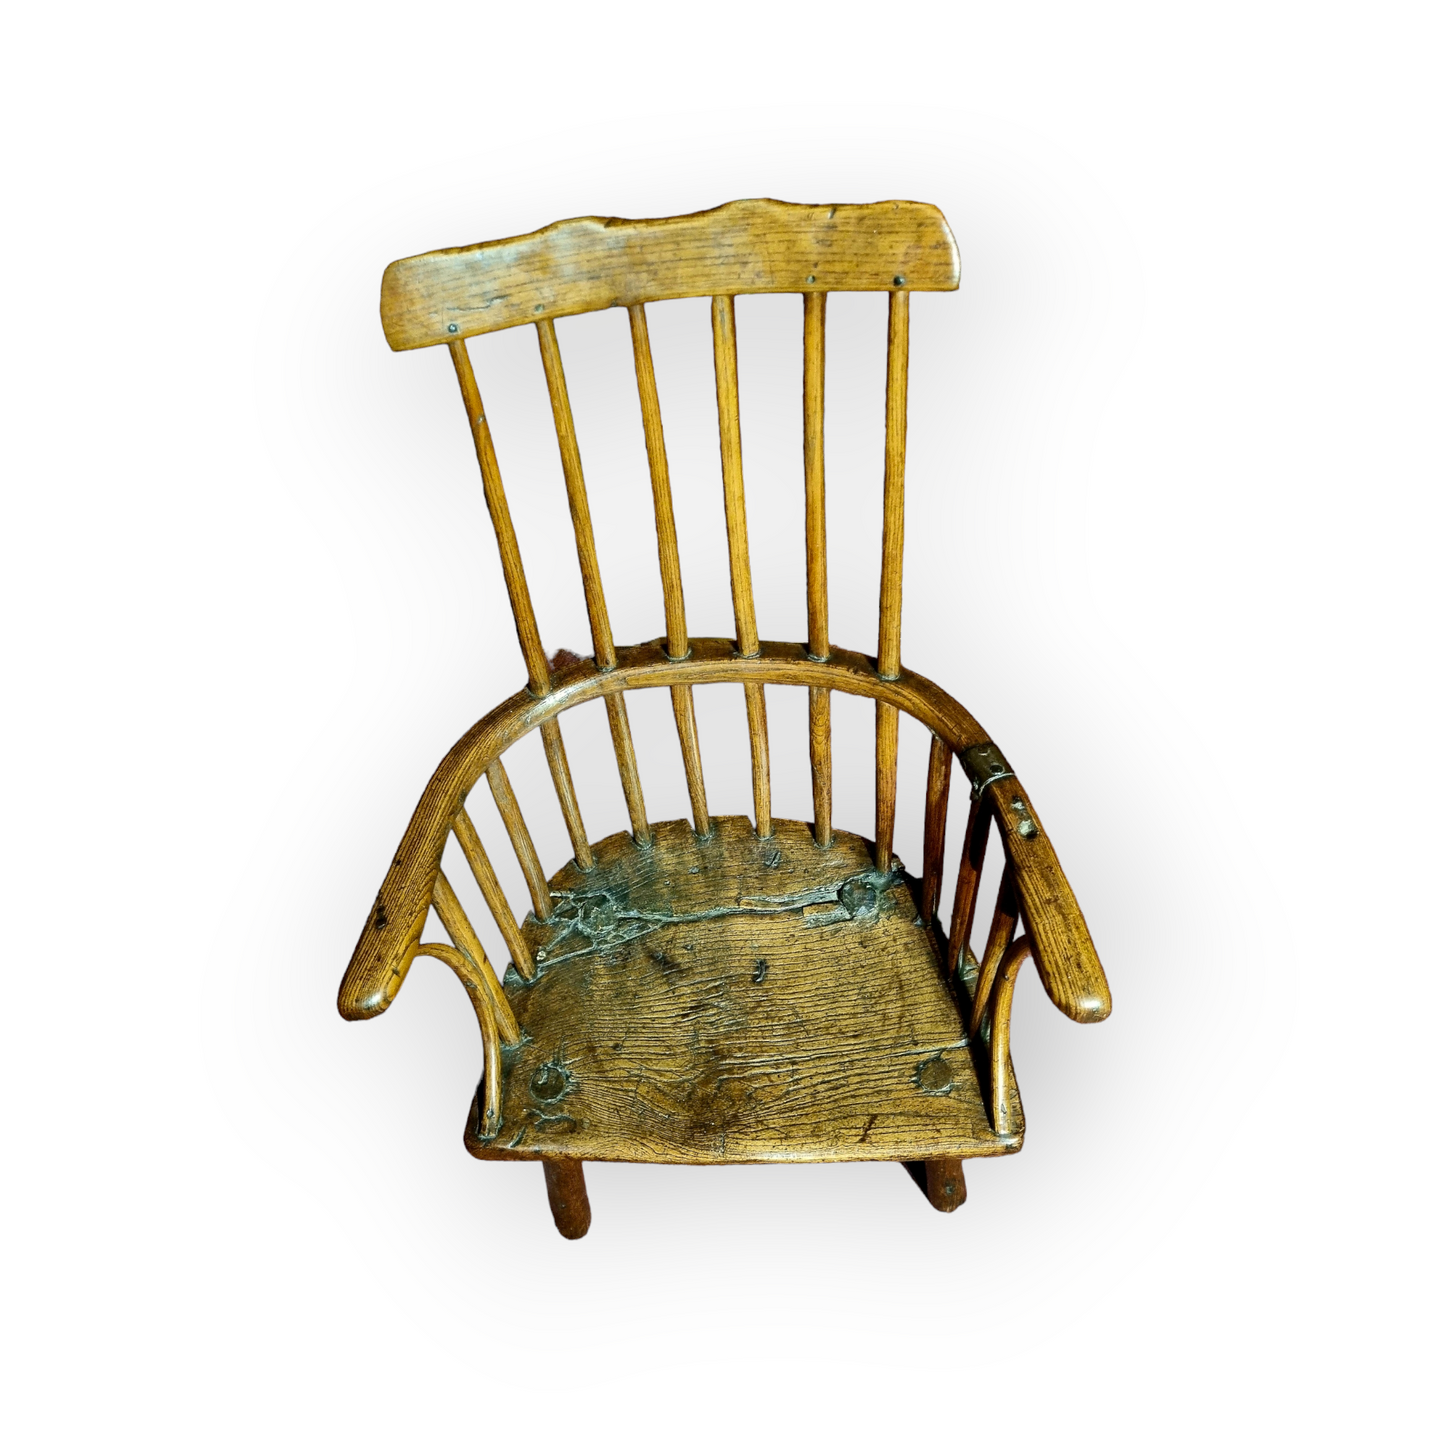 Late 18th Century English Antique West-Country Made Child's Comb-Back Windsor Armchair, circa 1780